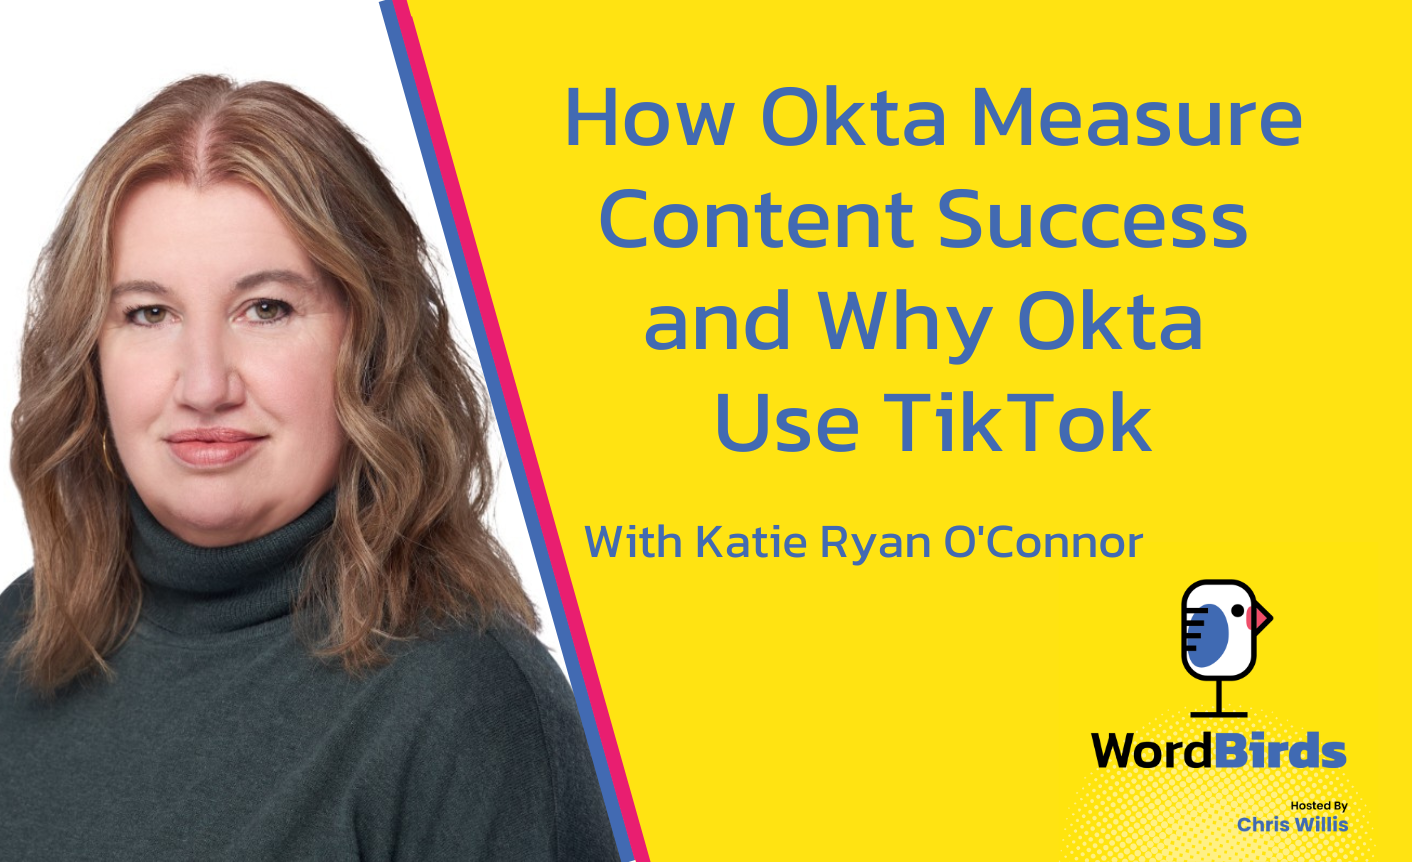 An image of Katie Ryan O'Connor is on the left of the image. On the right is the title "How Okat Measure Content Success and Why Okta Use TikTok" is on a yellow background.